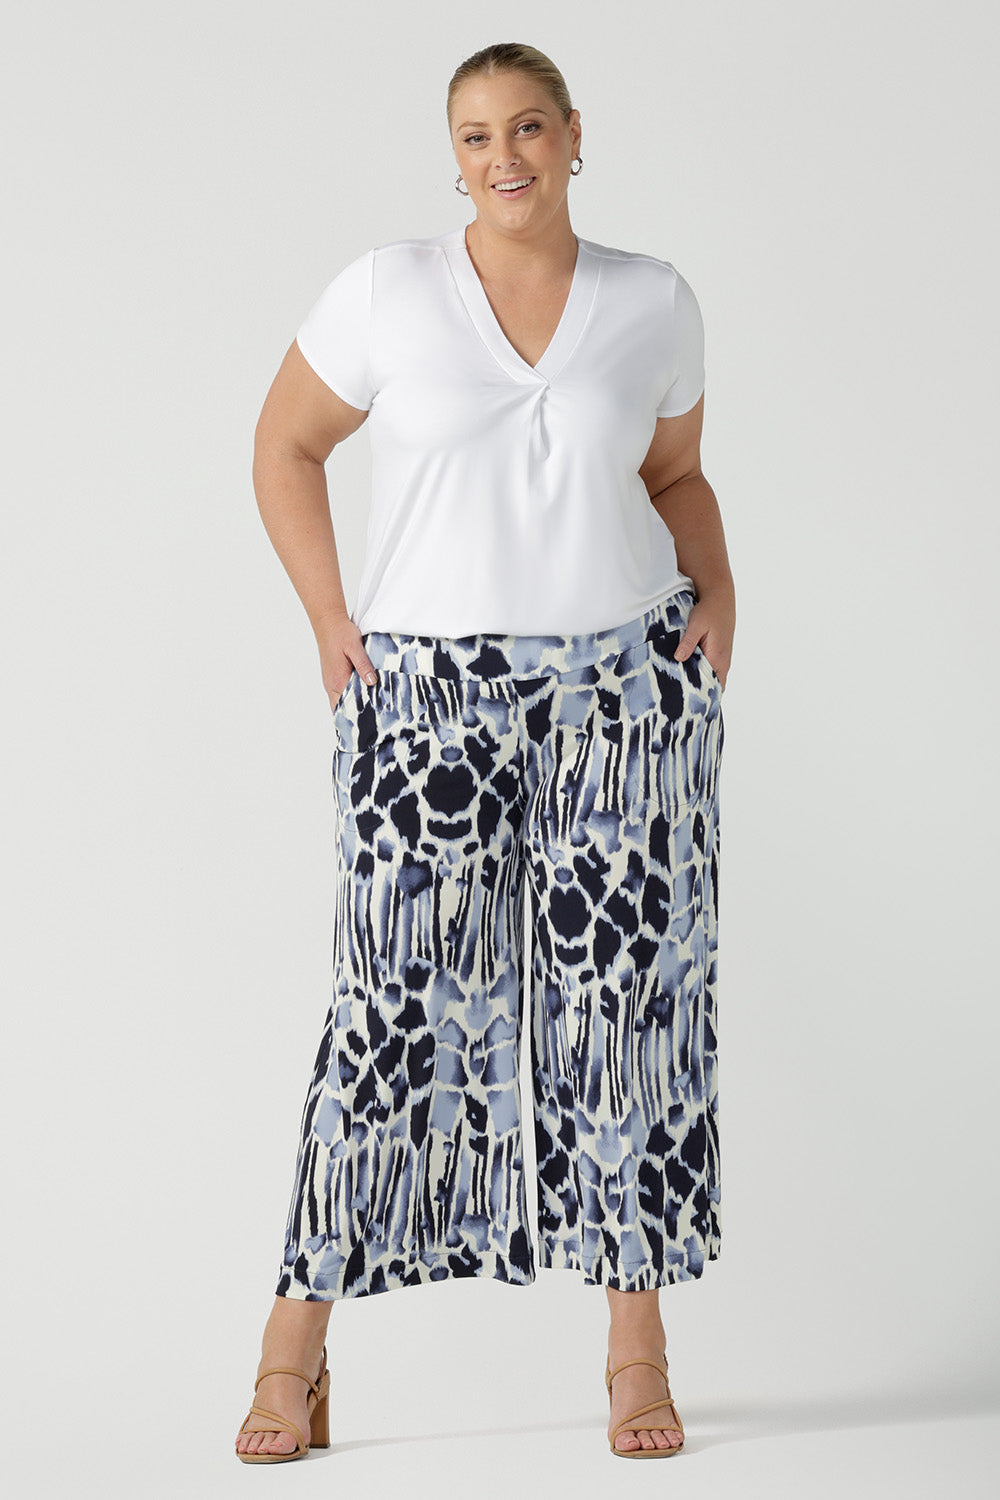 A size 18, plus size woman wears cropped, wide leg culotte pants in blue and white print with a short sleeve, white top in bamboo jersey. Great summer pants, these culottes are easy care and comfortable as work wear pants or for casual wear. Made in Australia by Australian women's clothing brand, Leina & Fleur